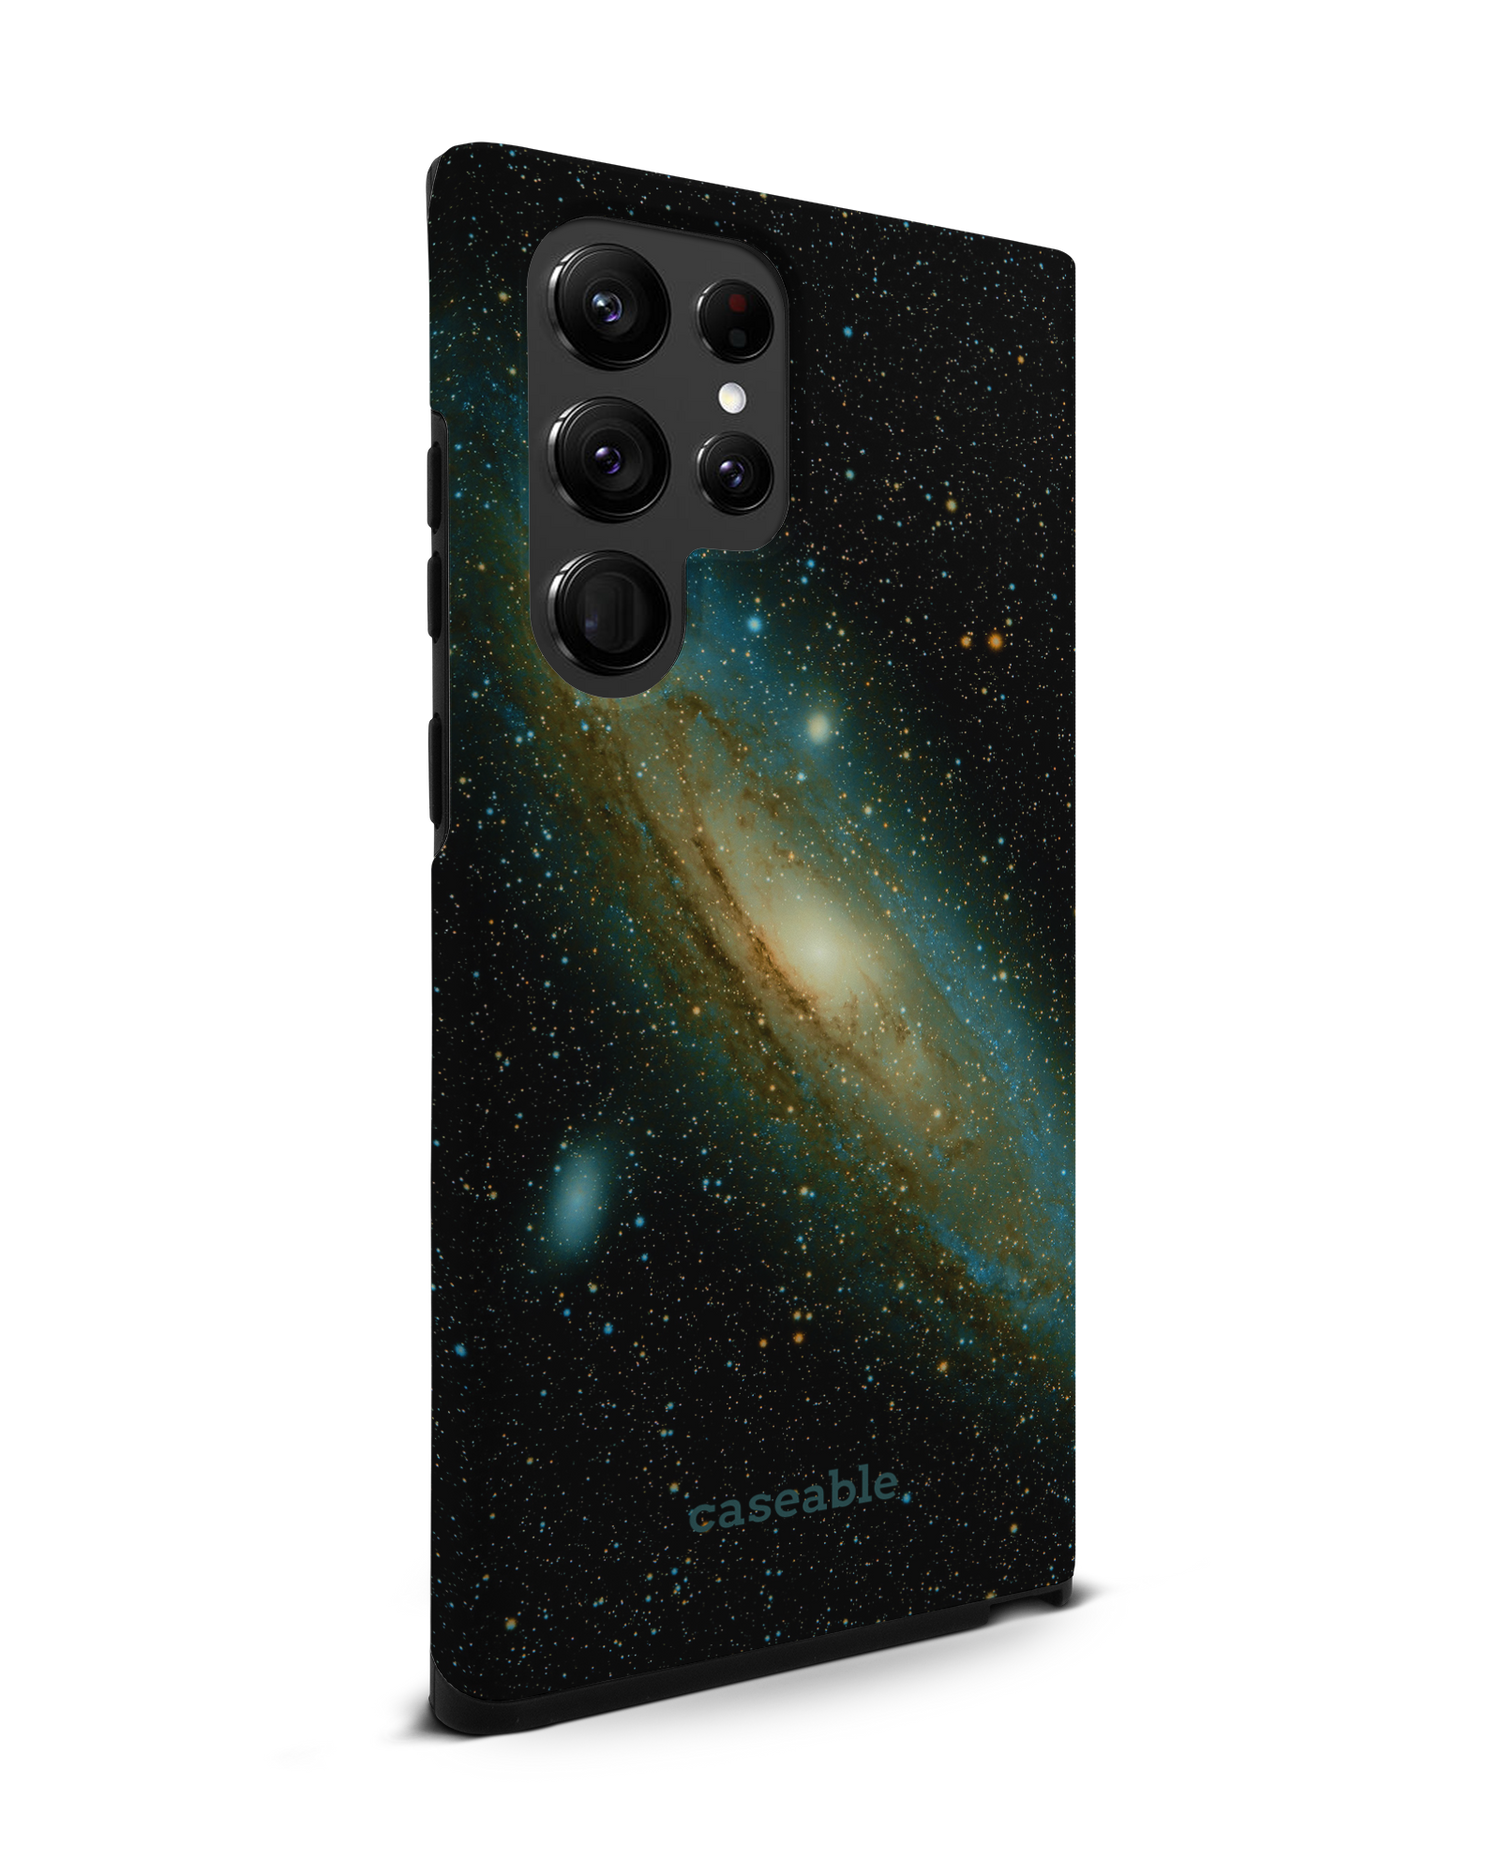 Outer Space Premium Phone Case Samsung Galaxy S22 Ultra 5G: View from the left side